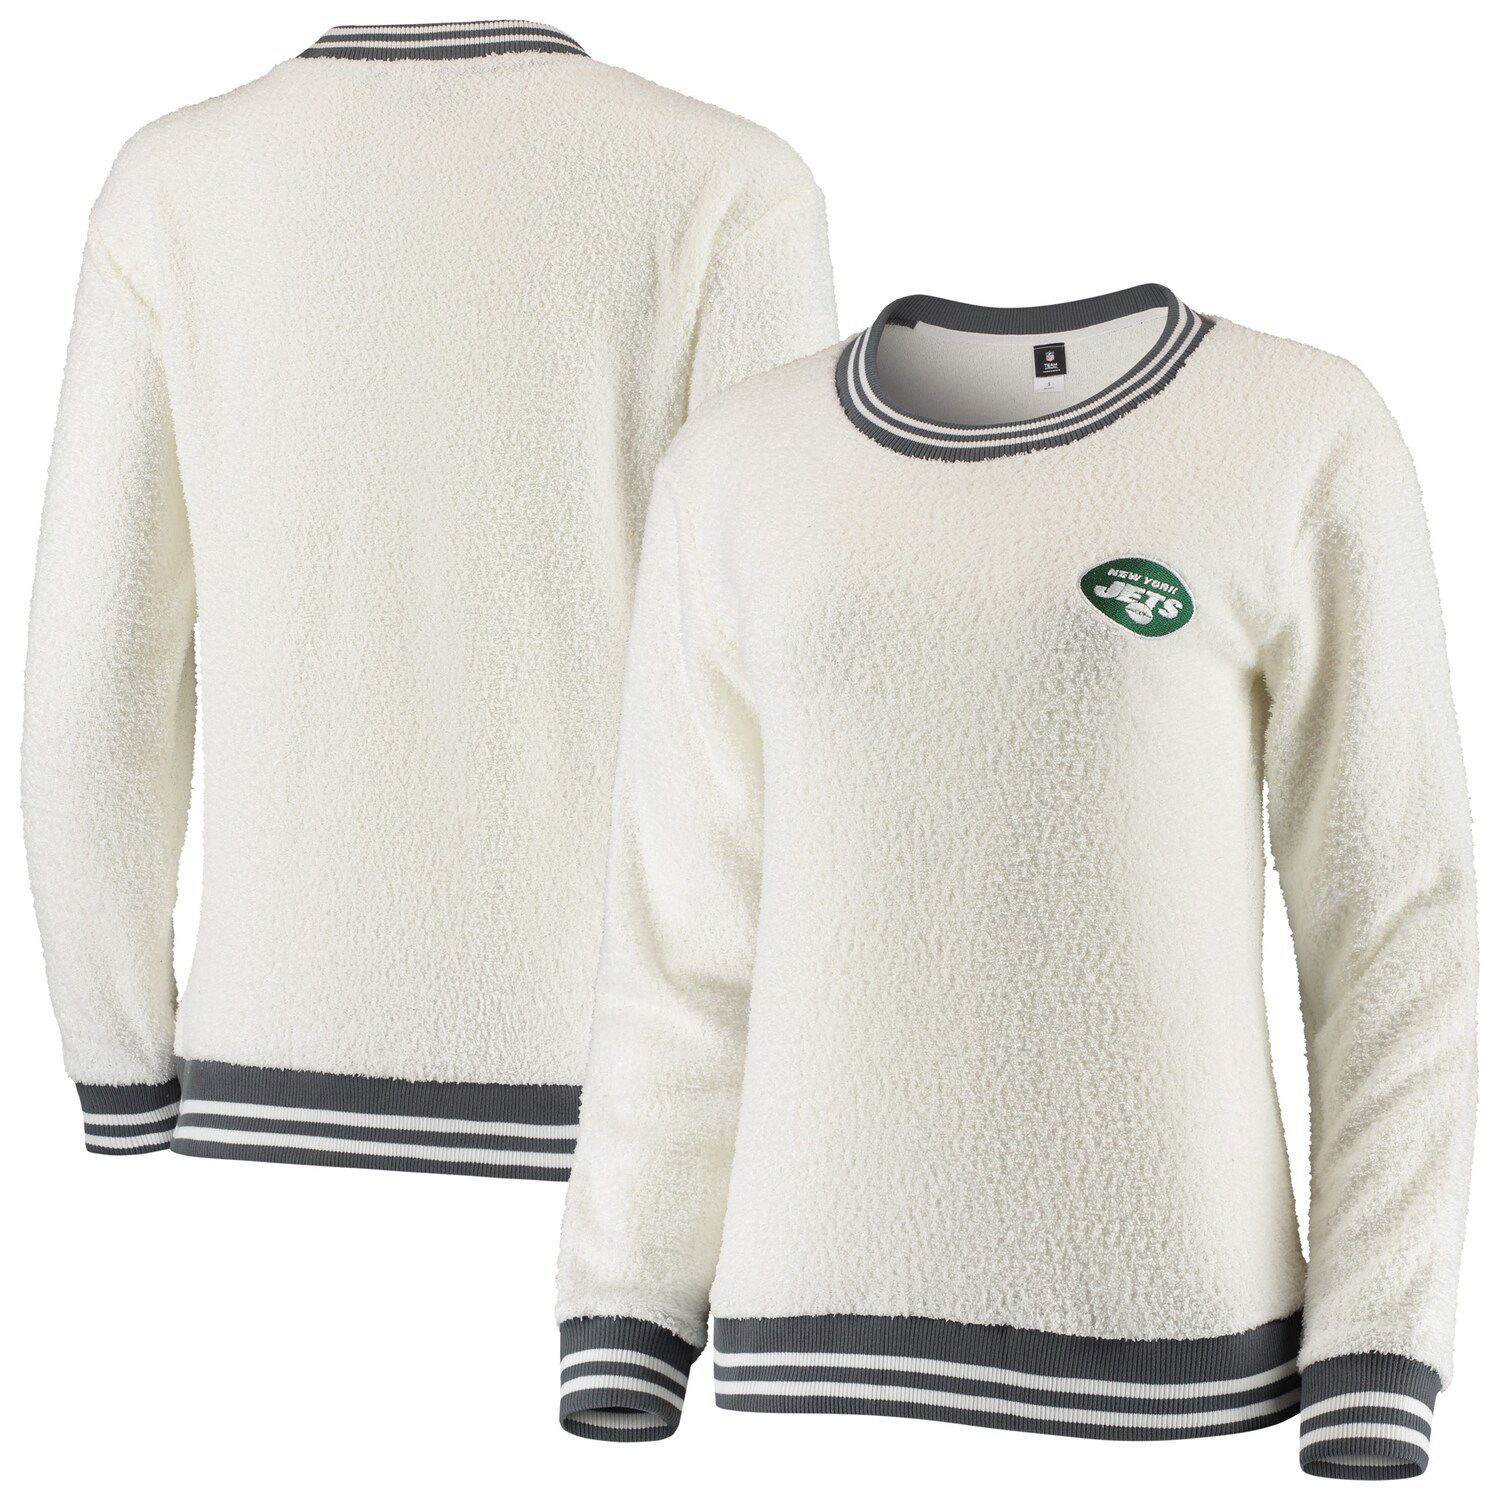 Image for Unbranded Women's Concepts Sport Cream/Charcoal New York Jets Granite Knit Pullover Sweatshirt at Kohl's.